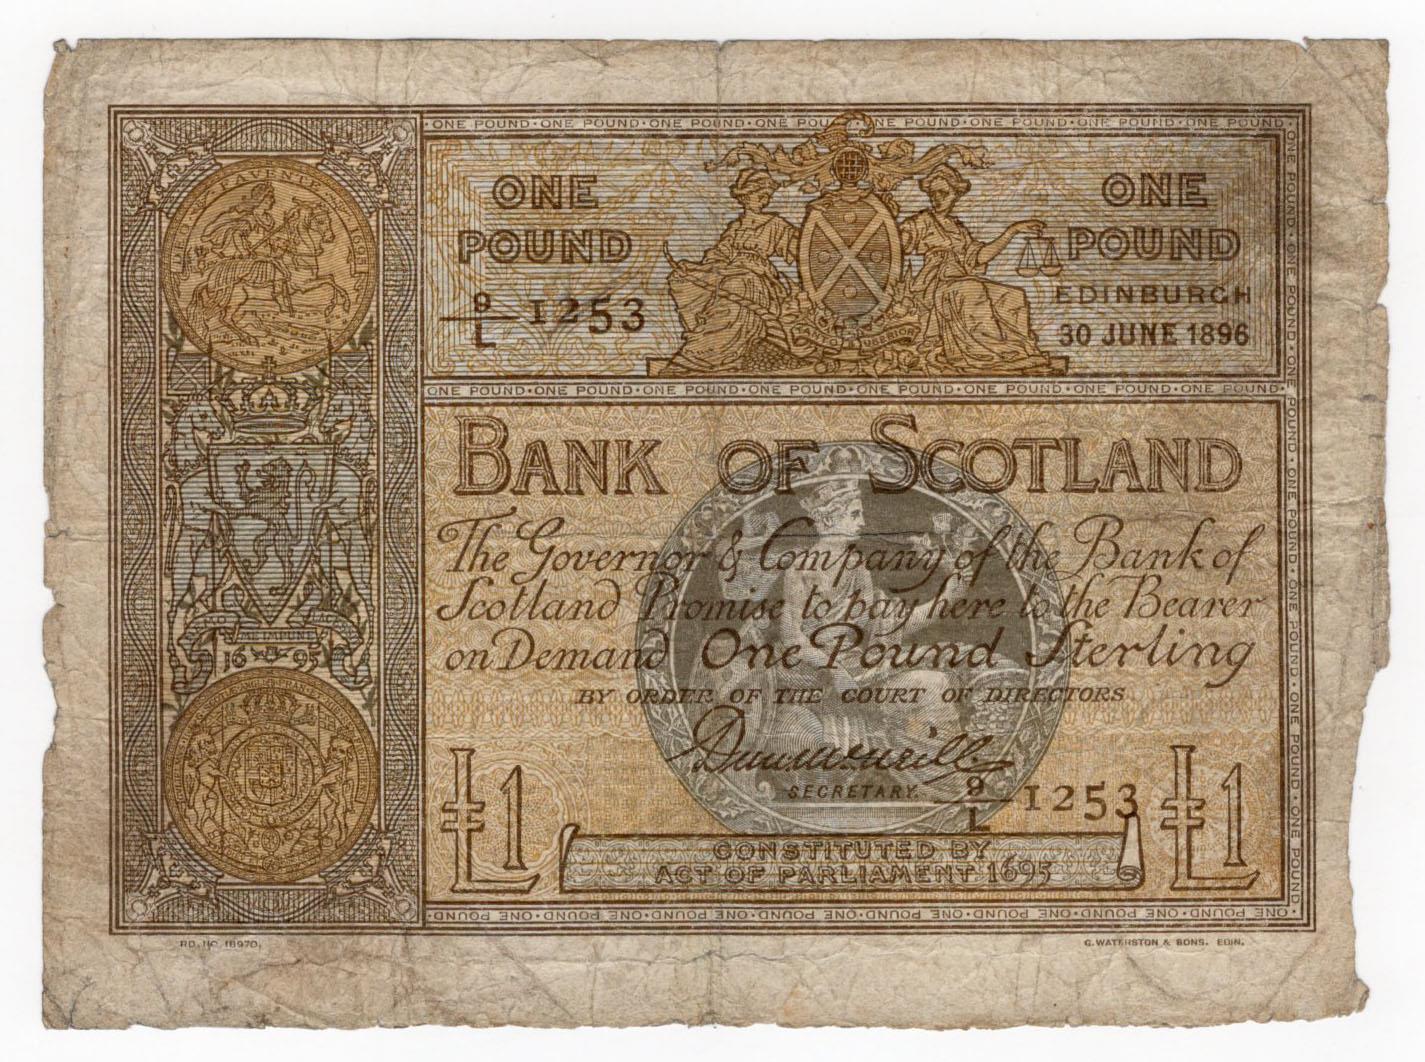 Scotland, Bank of Scotland 1 Pound dated 30th June 1896, signed Duncan McNeill, serial 9/L 1253 (PMS